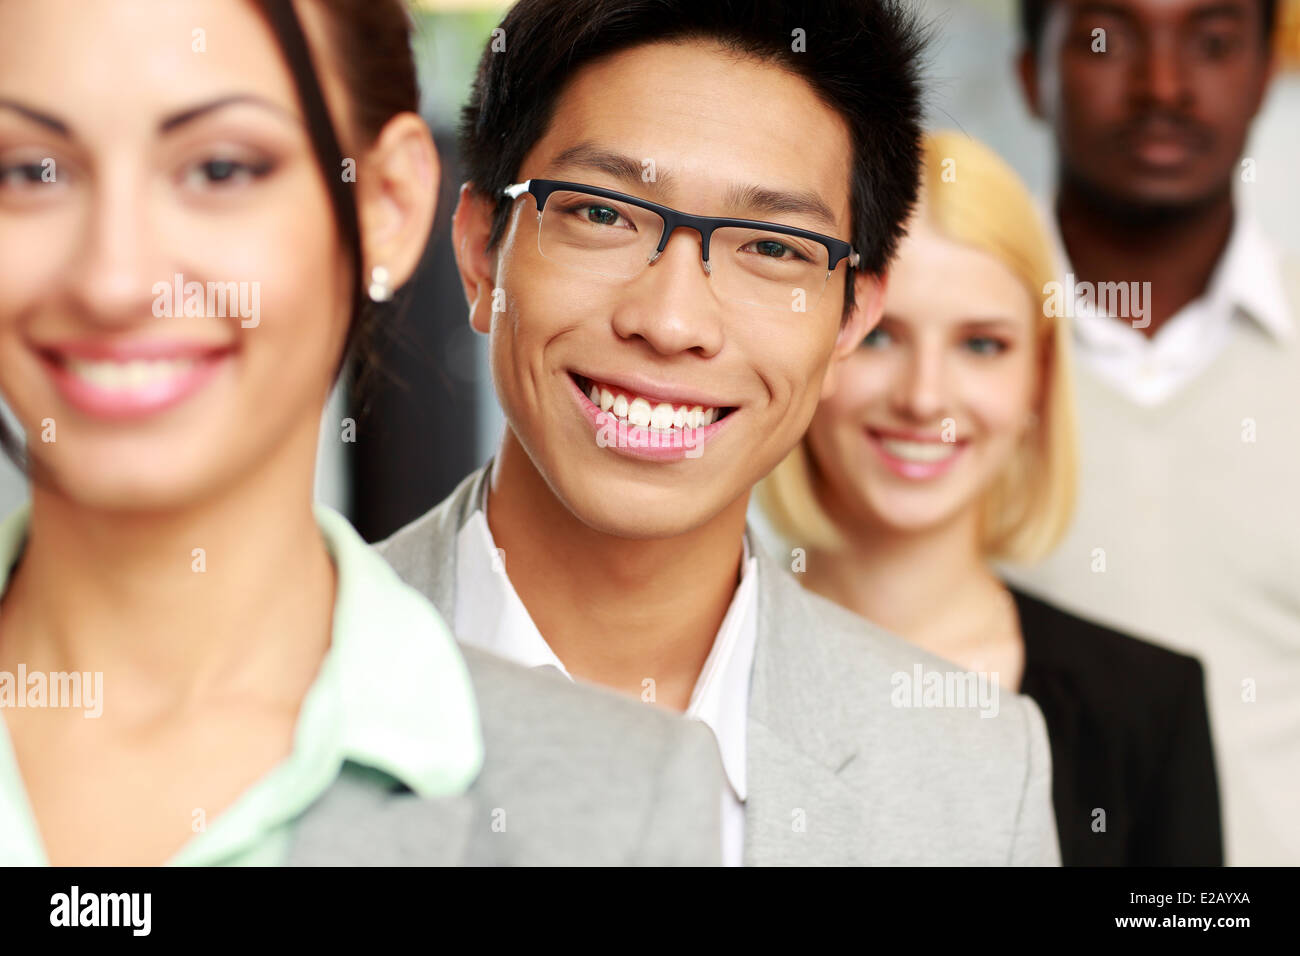 Portrait of a smiling group business people Stock Photo